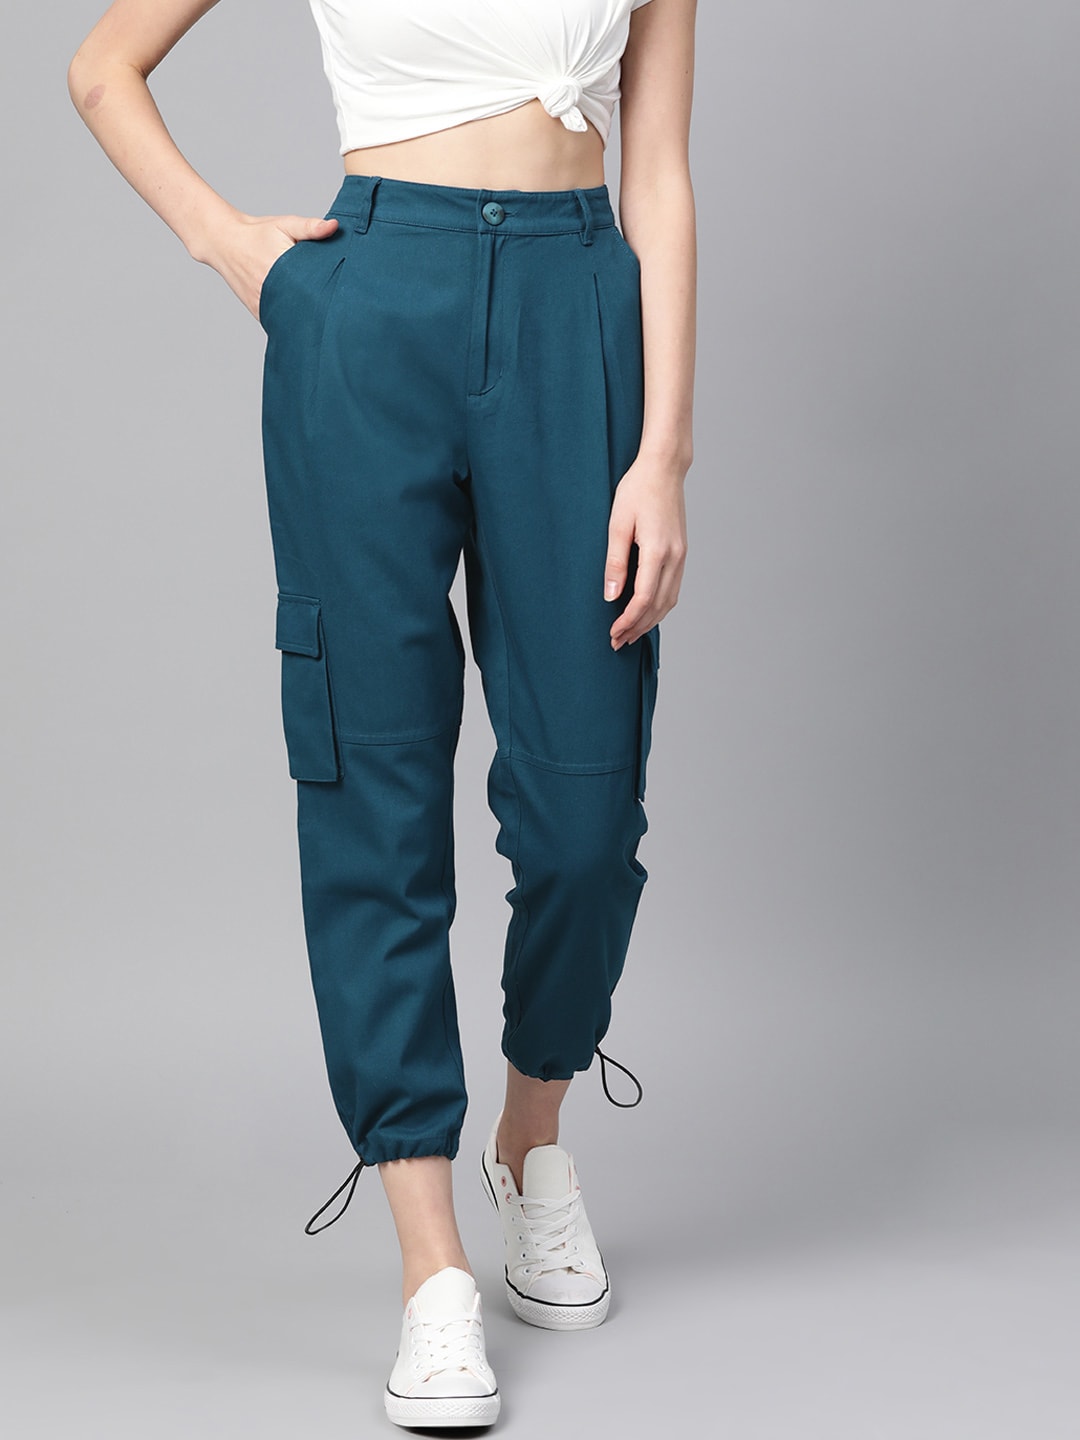 Mast & Harbour Women Teal Blue Joggers Price in India